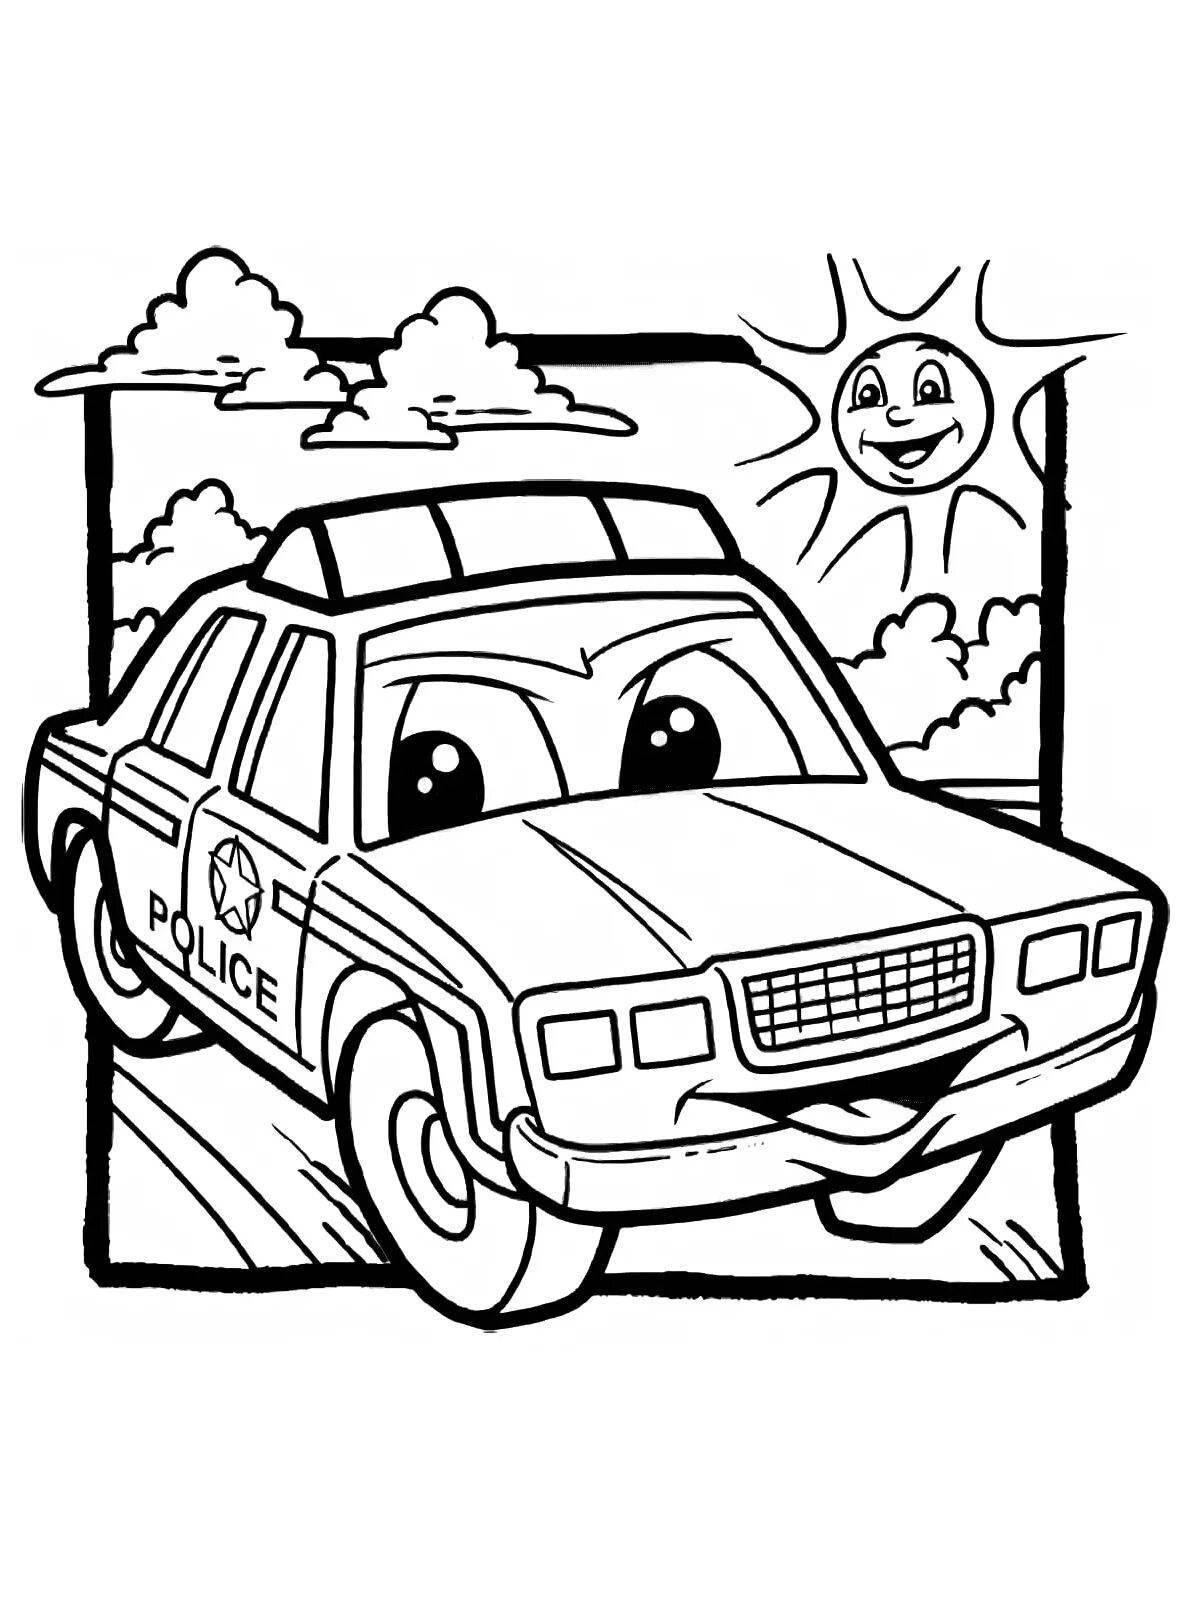 Playful baby cop coloring page